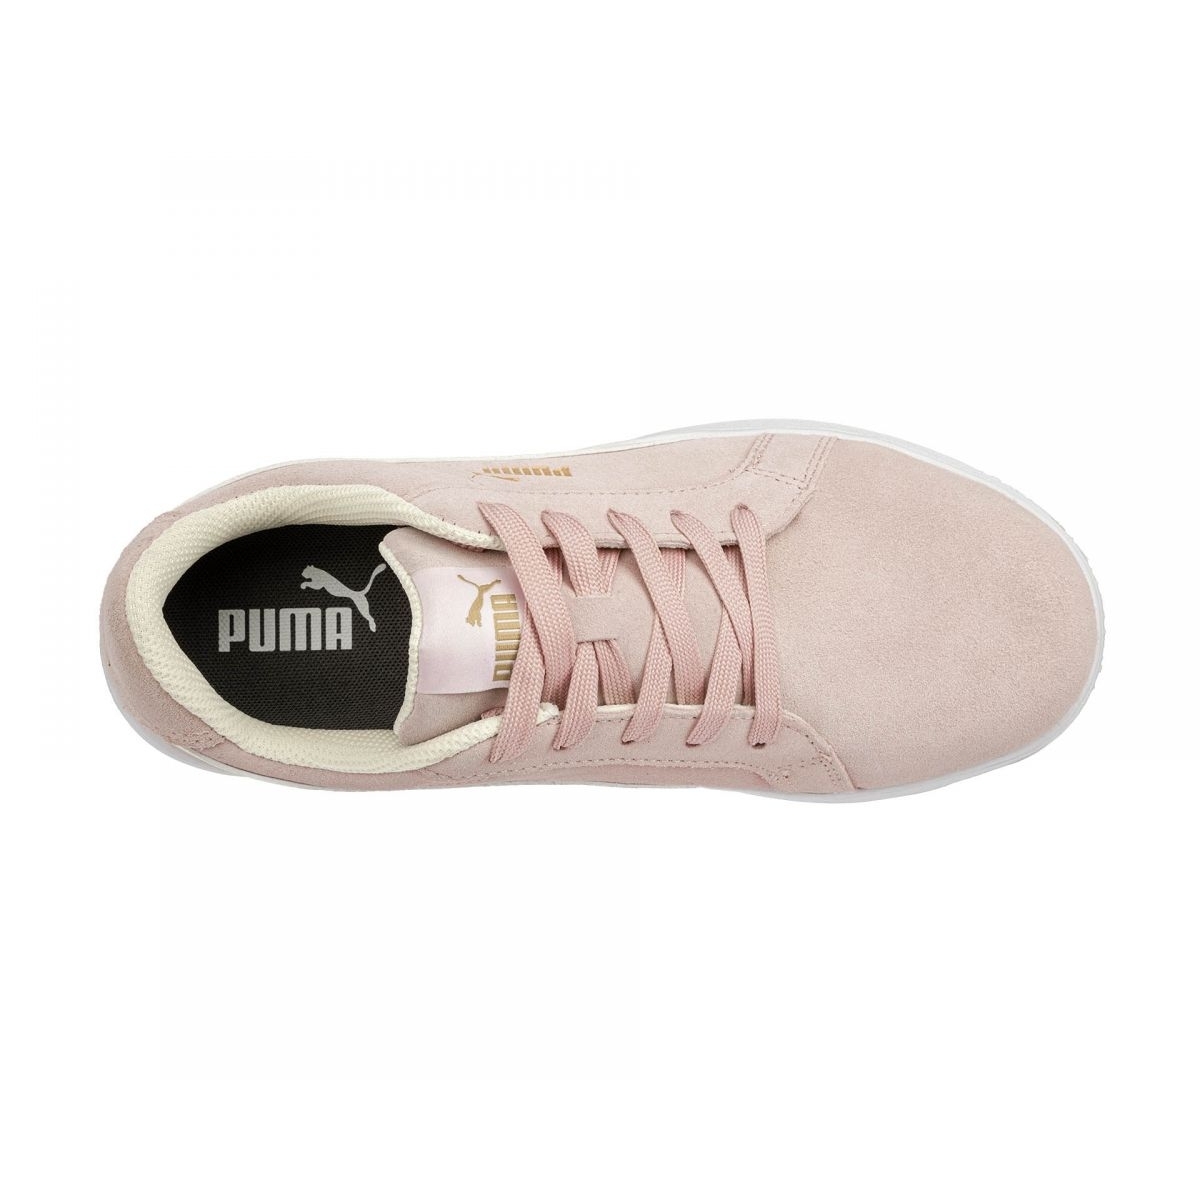 PUMA Safety Women's Iconic Low Composite Toe EH Work Shoes Pink Suede - 640145 PINK - PINK, 9